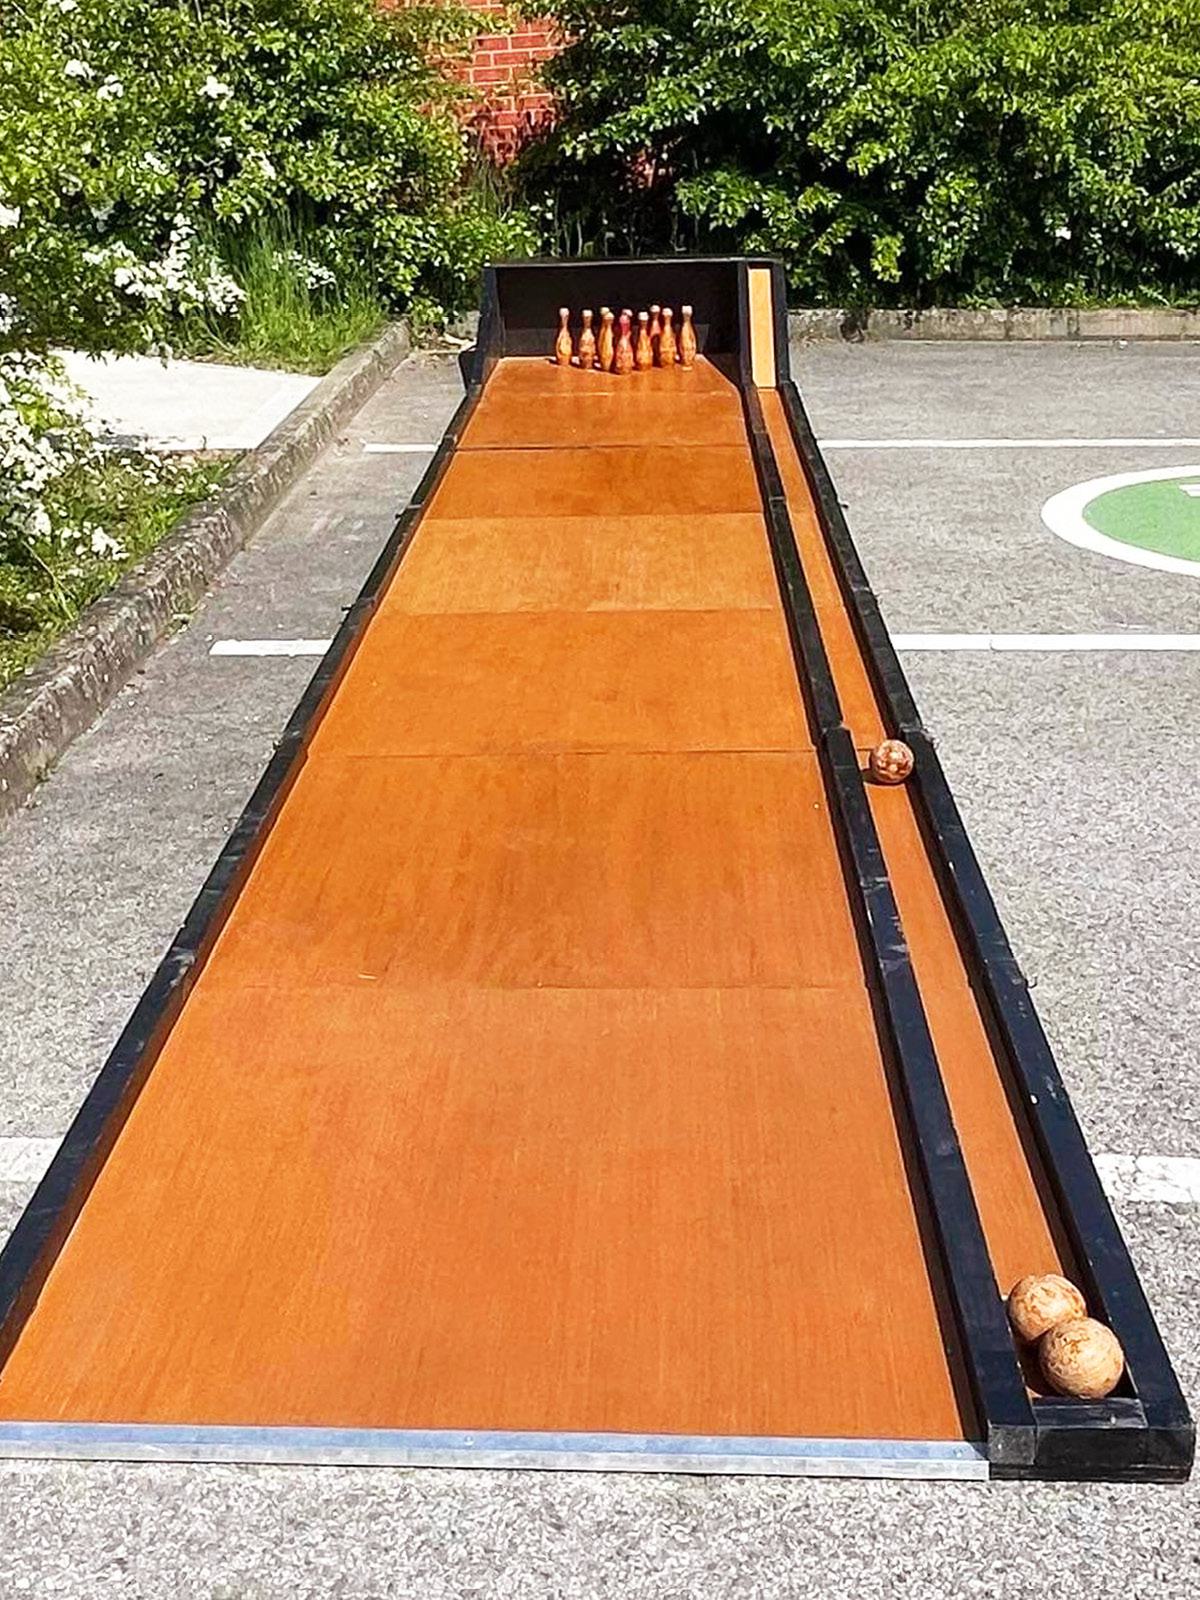 Skittle Alley Hire